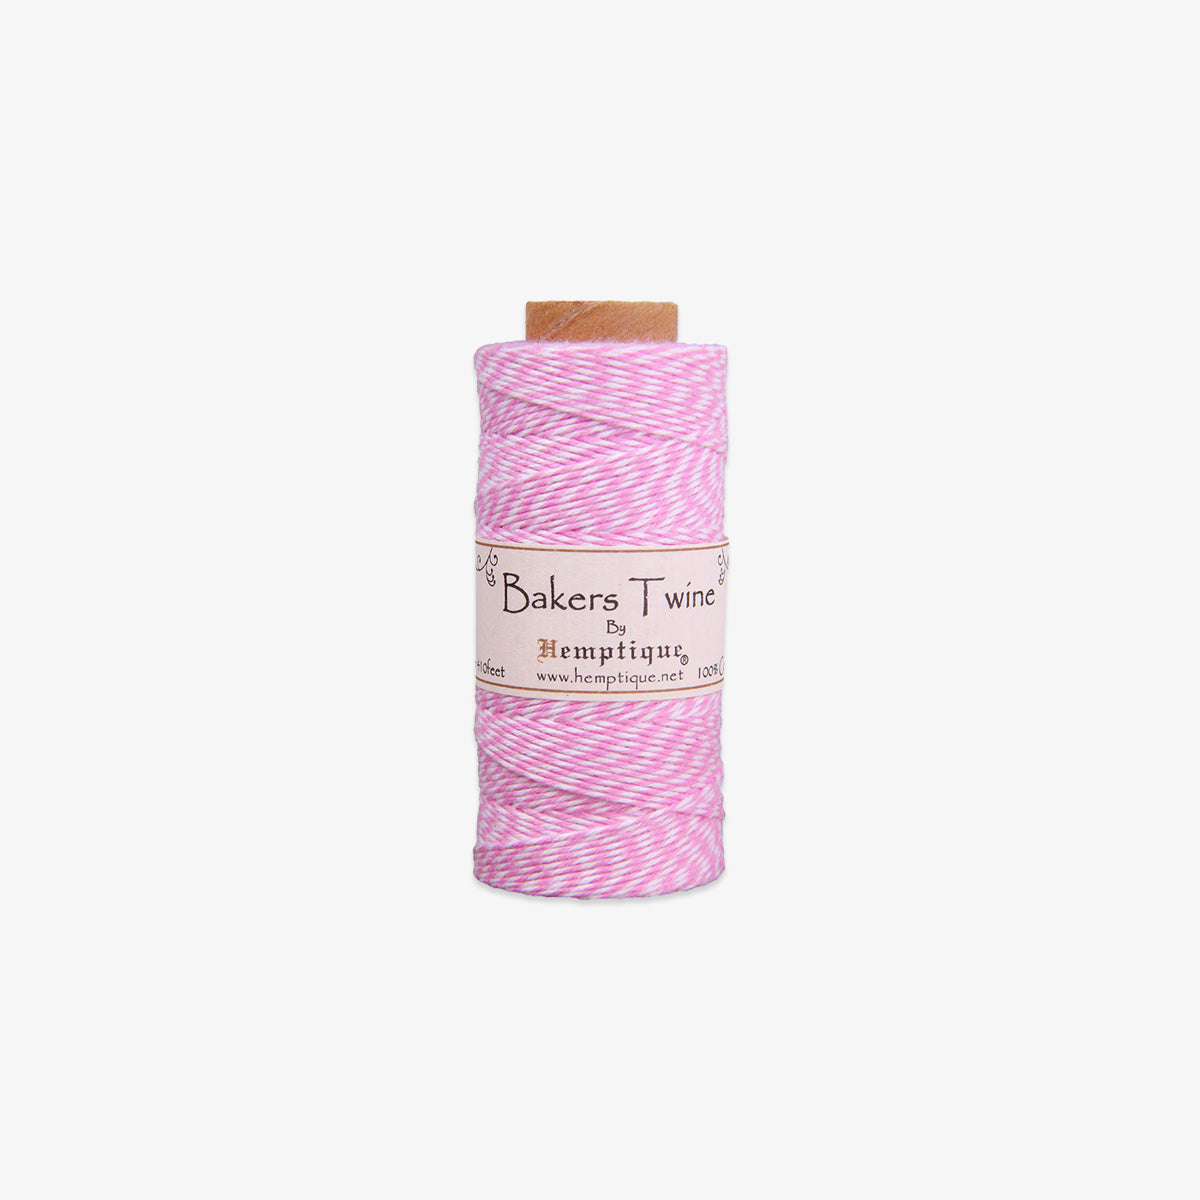 BAKERS TWINE // LIGHT PINK & WHITE